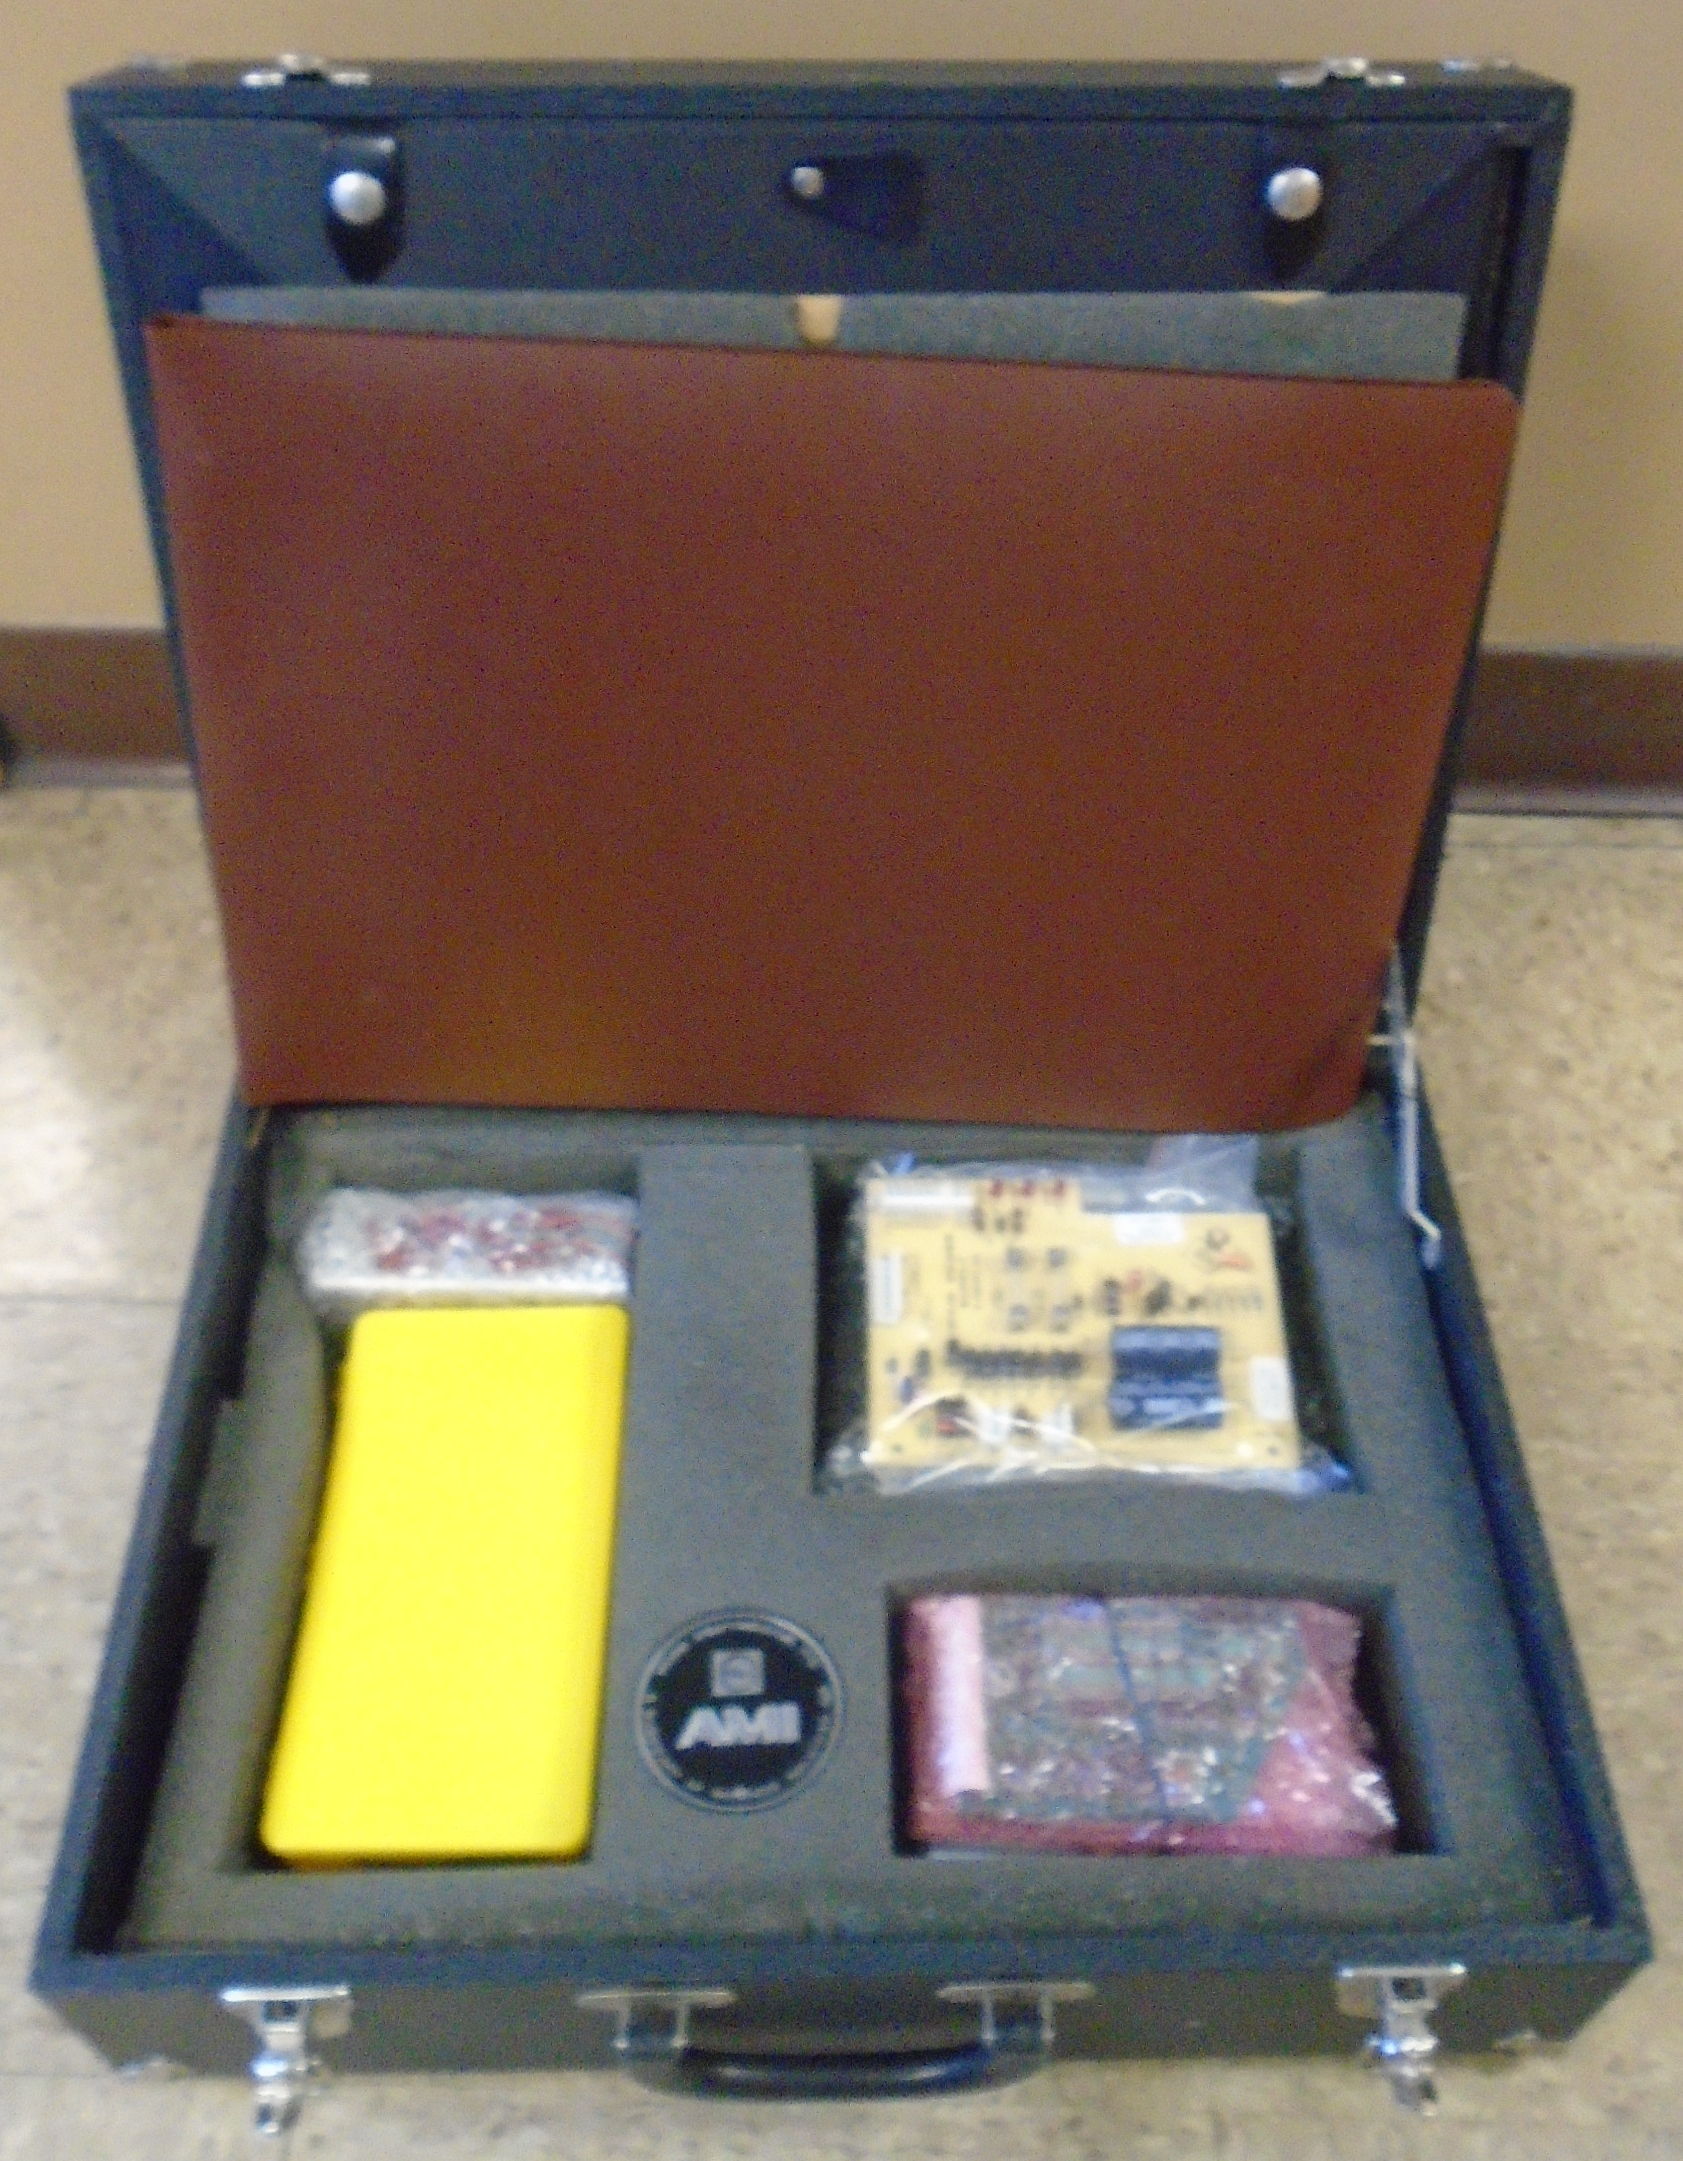 ROWE INTERNATIONAL Jukebox SERVICE KIT "SUITCASE" from 1986 for sale